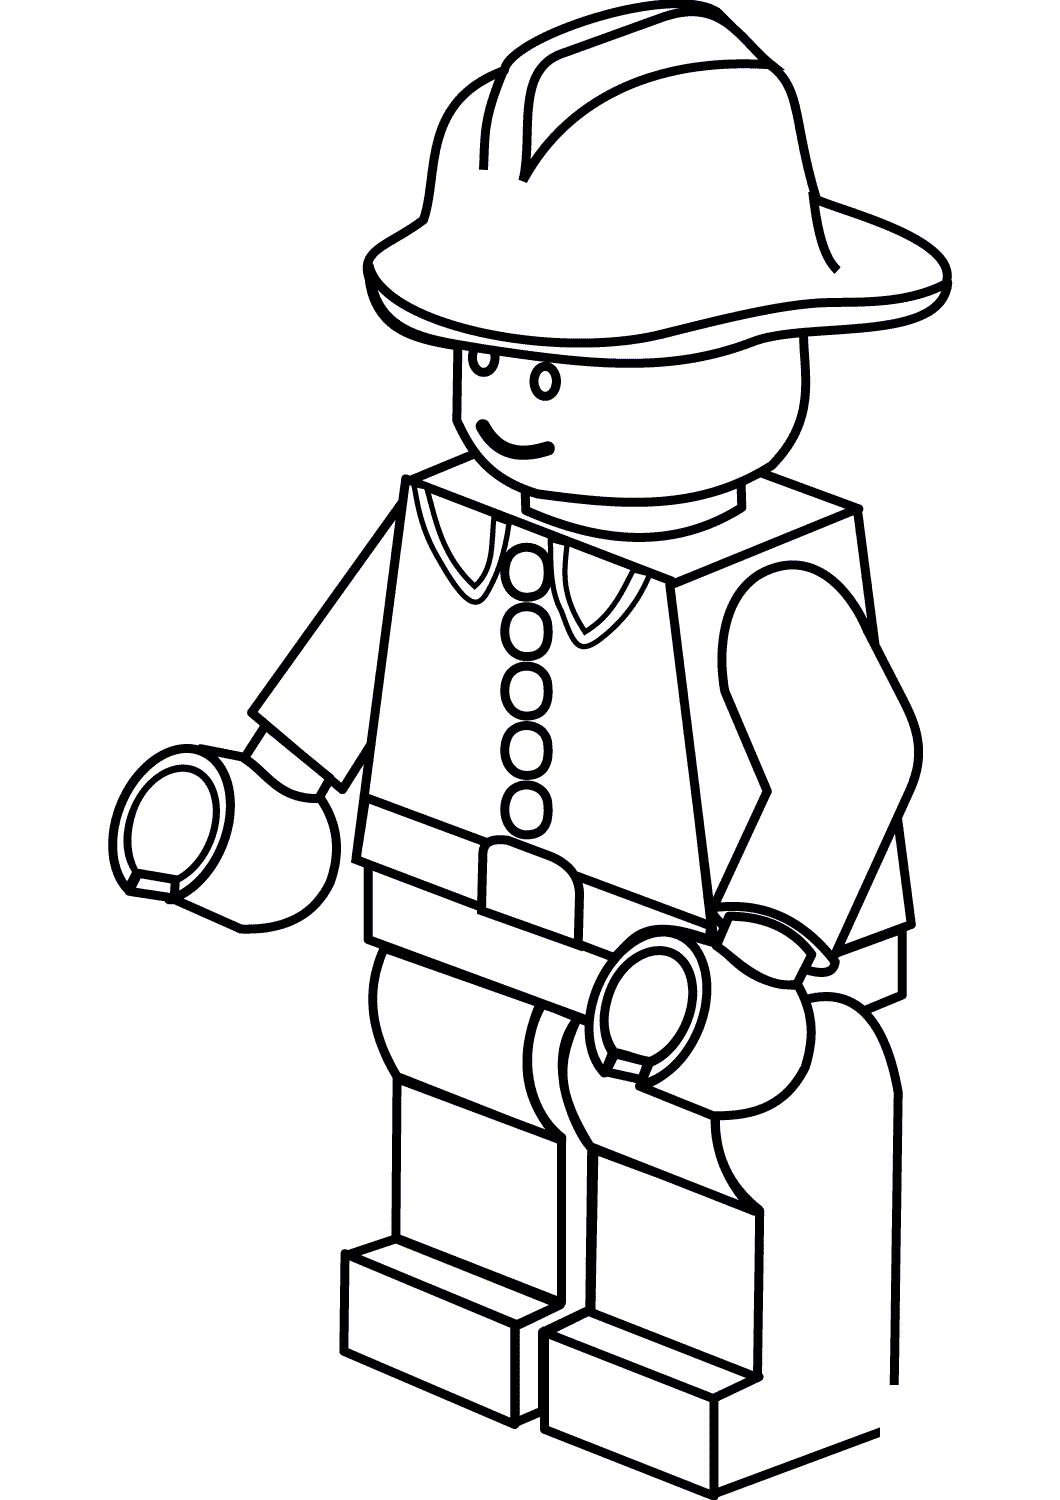 Lego City Firefighter Coloring Page